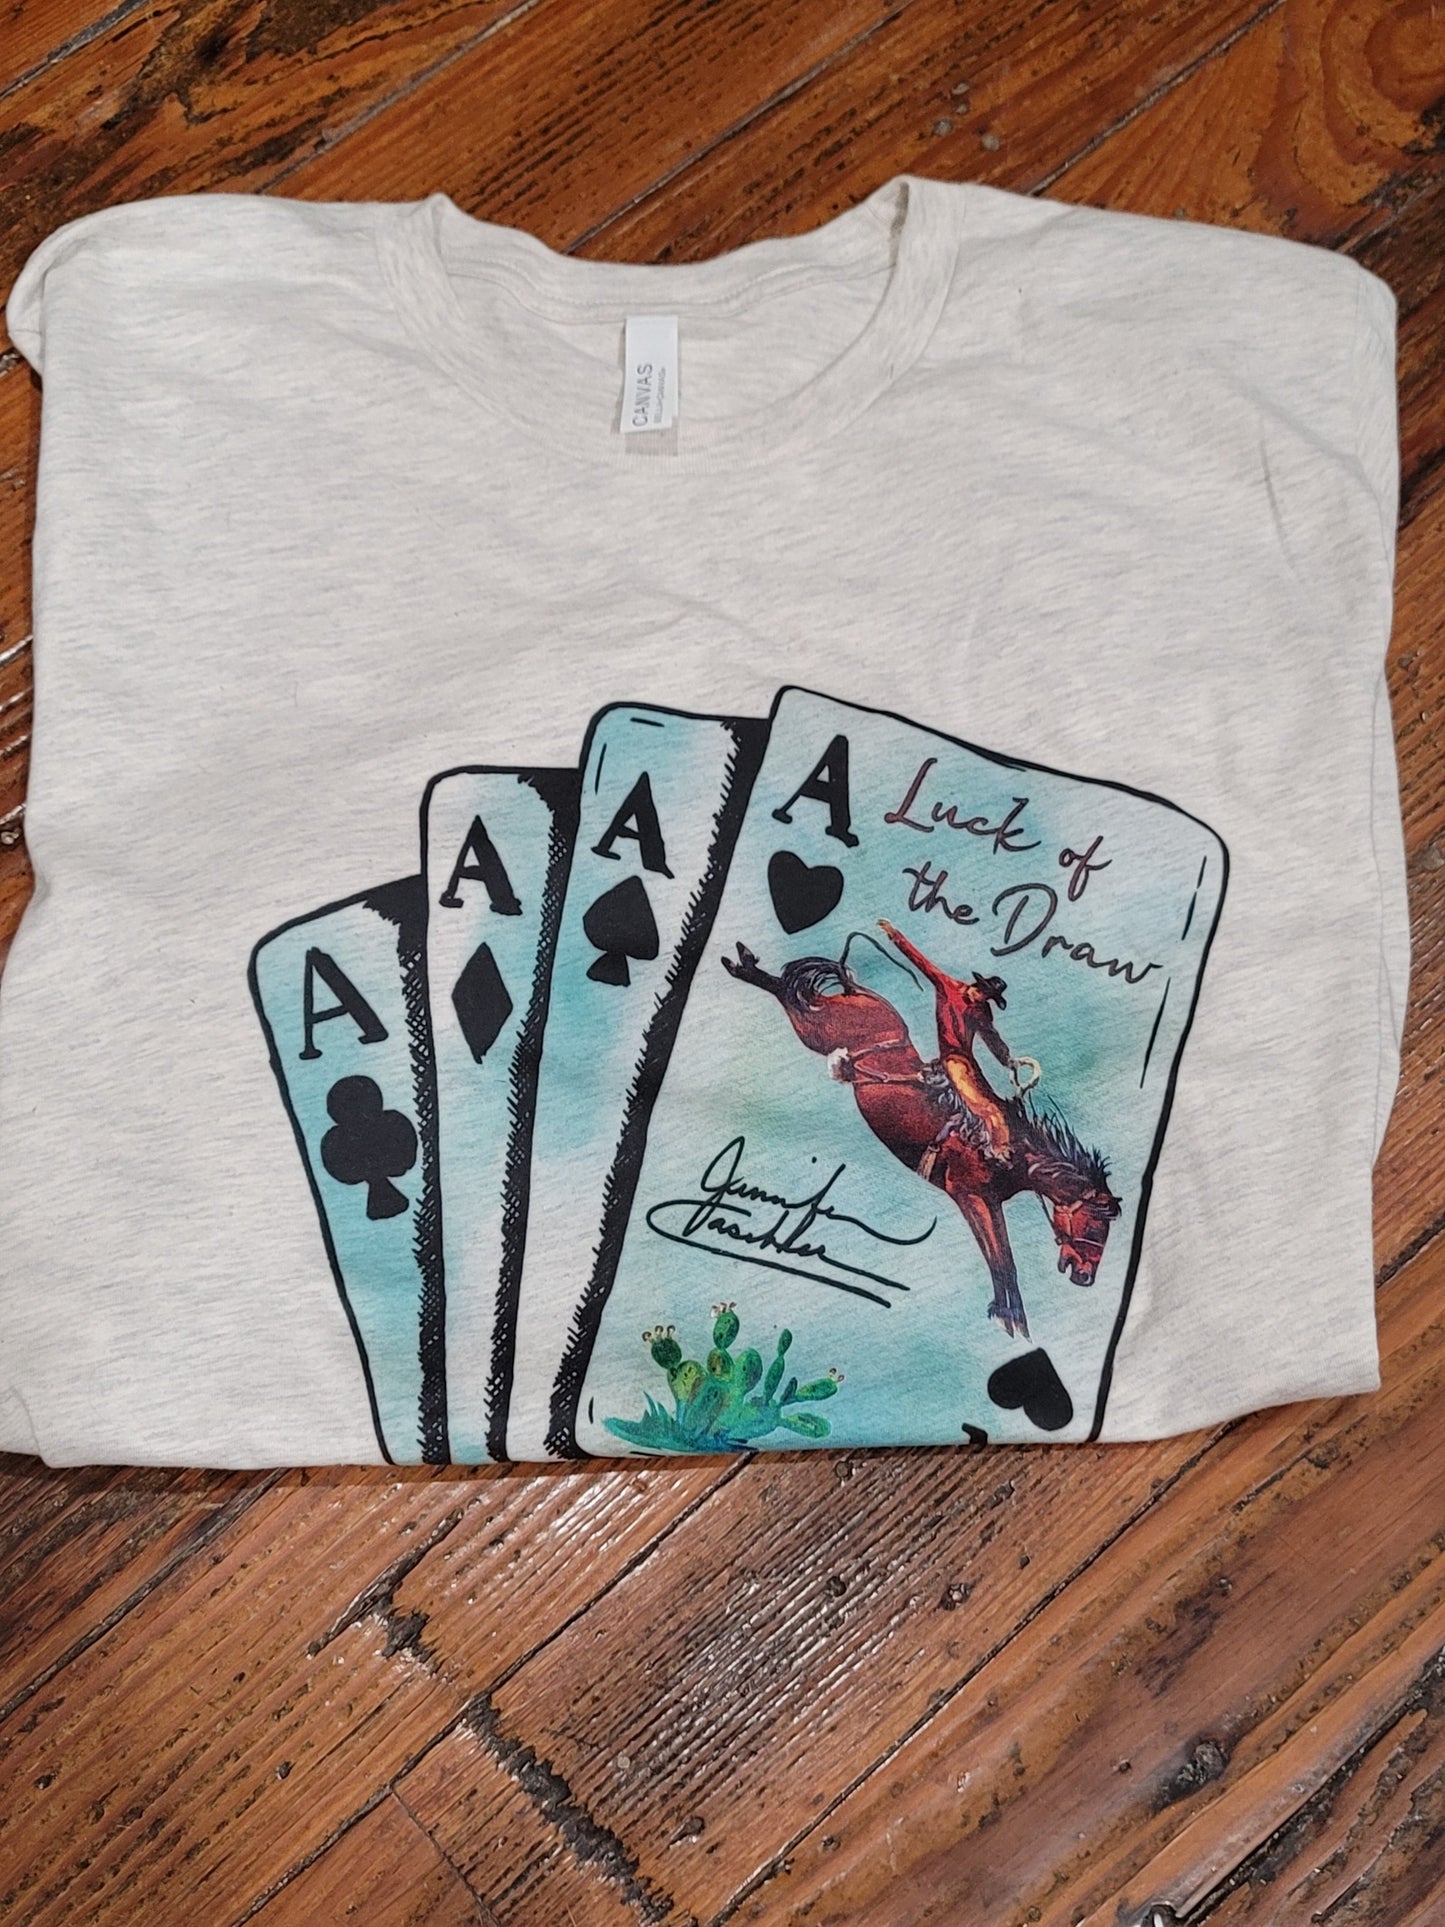 The Luck of the Draw T-shirt, Jennifer Casebeer Art